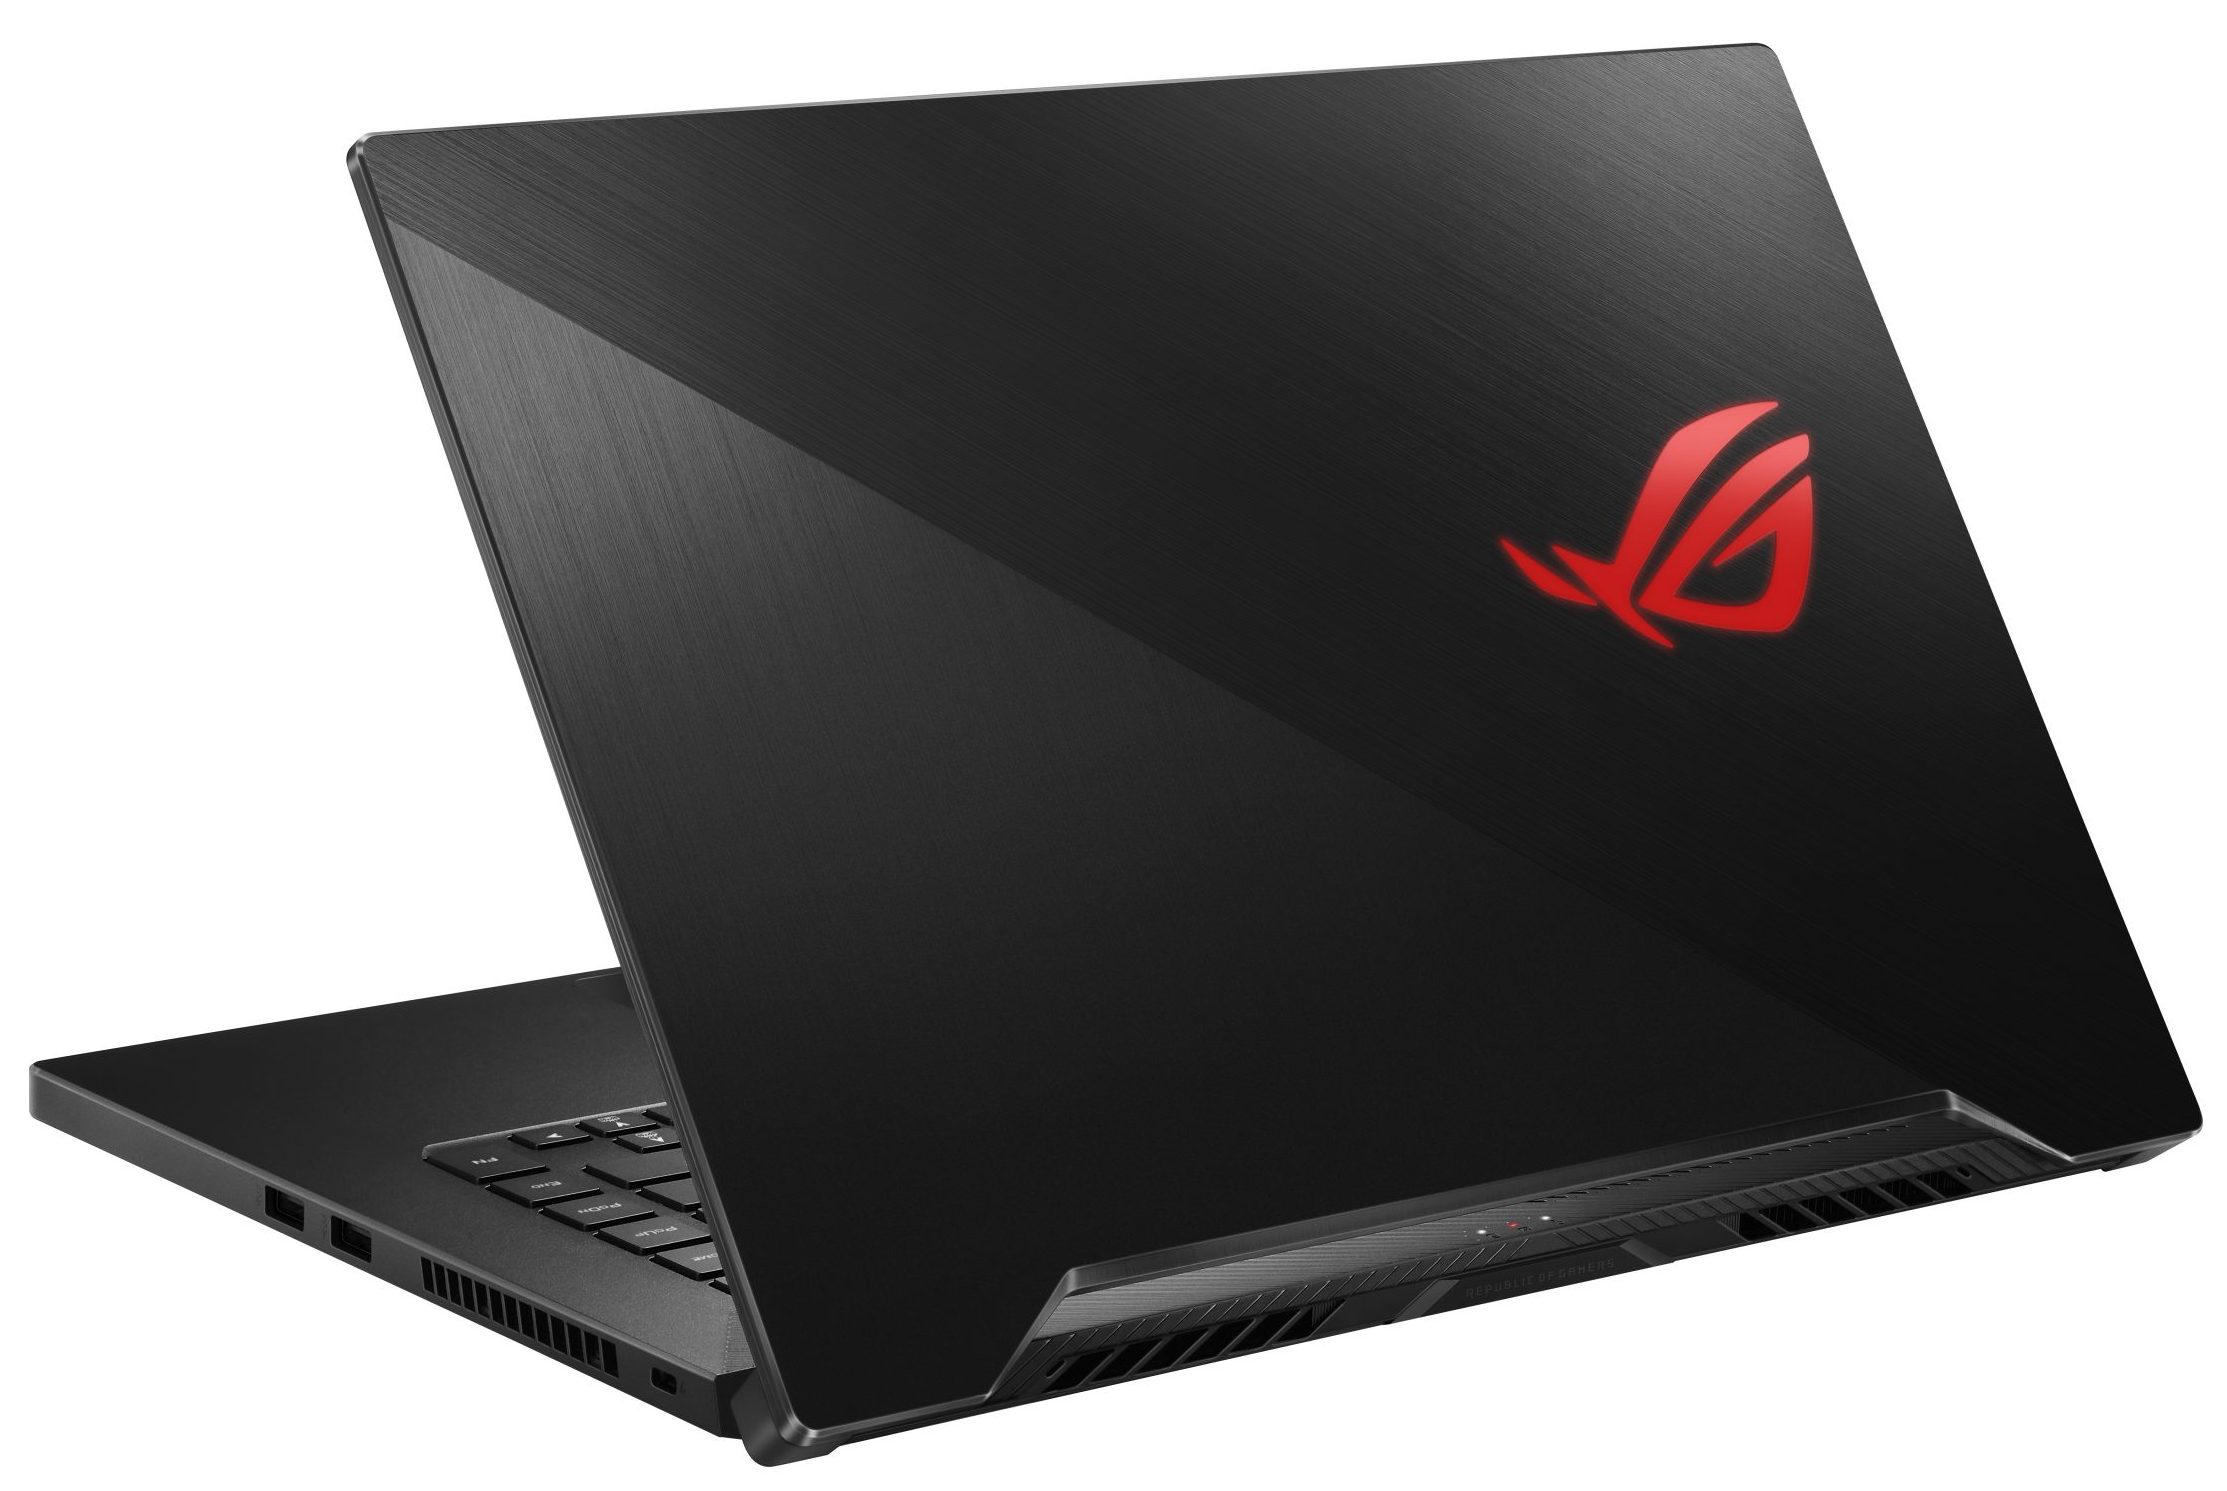 ASUS ROG Zephyrus G15 GA502 (2020) - Specs, Tests, and Prices